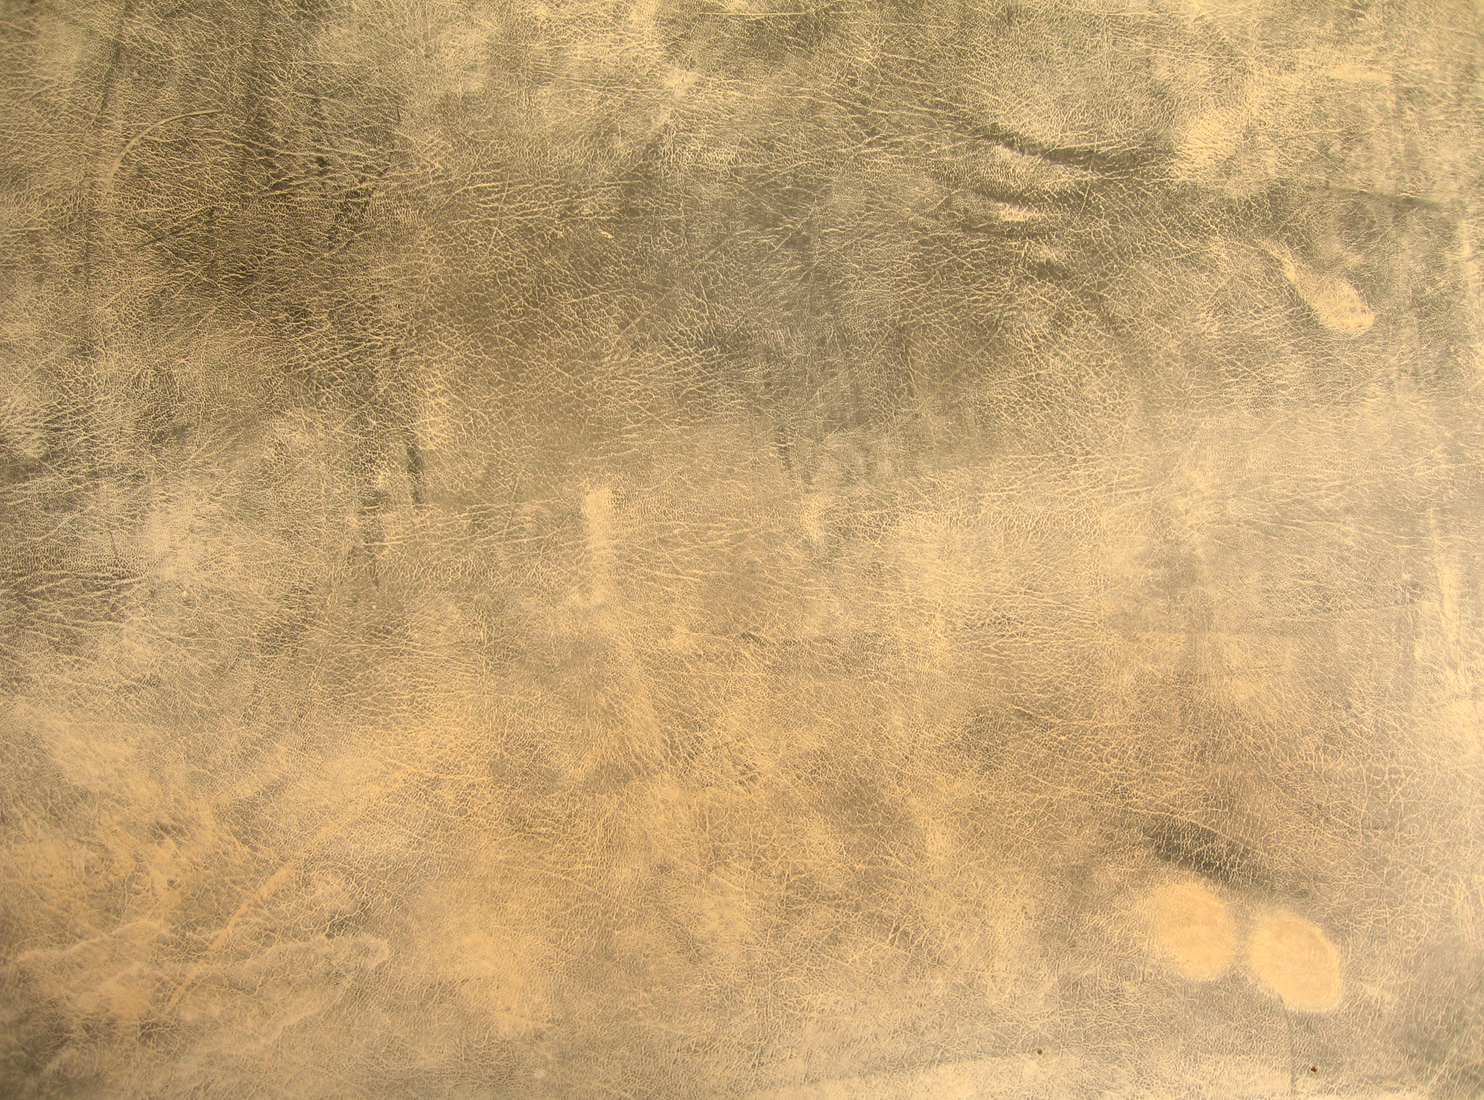 dusty leather TEXTURE